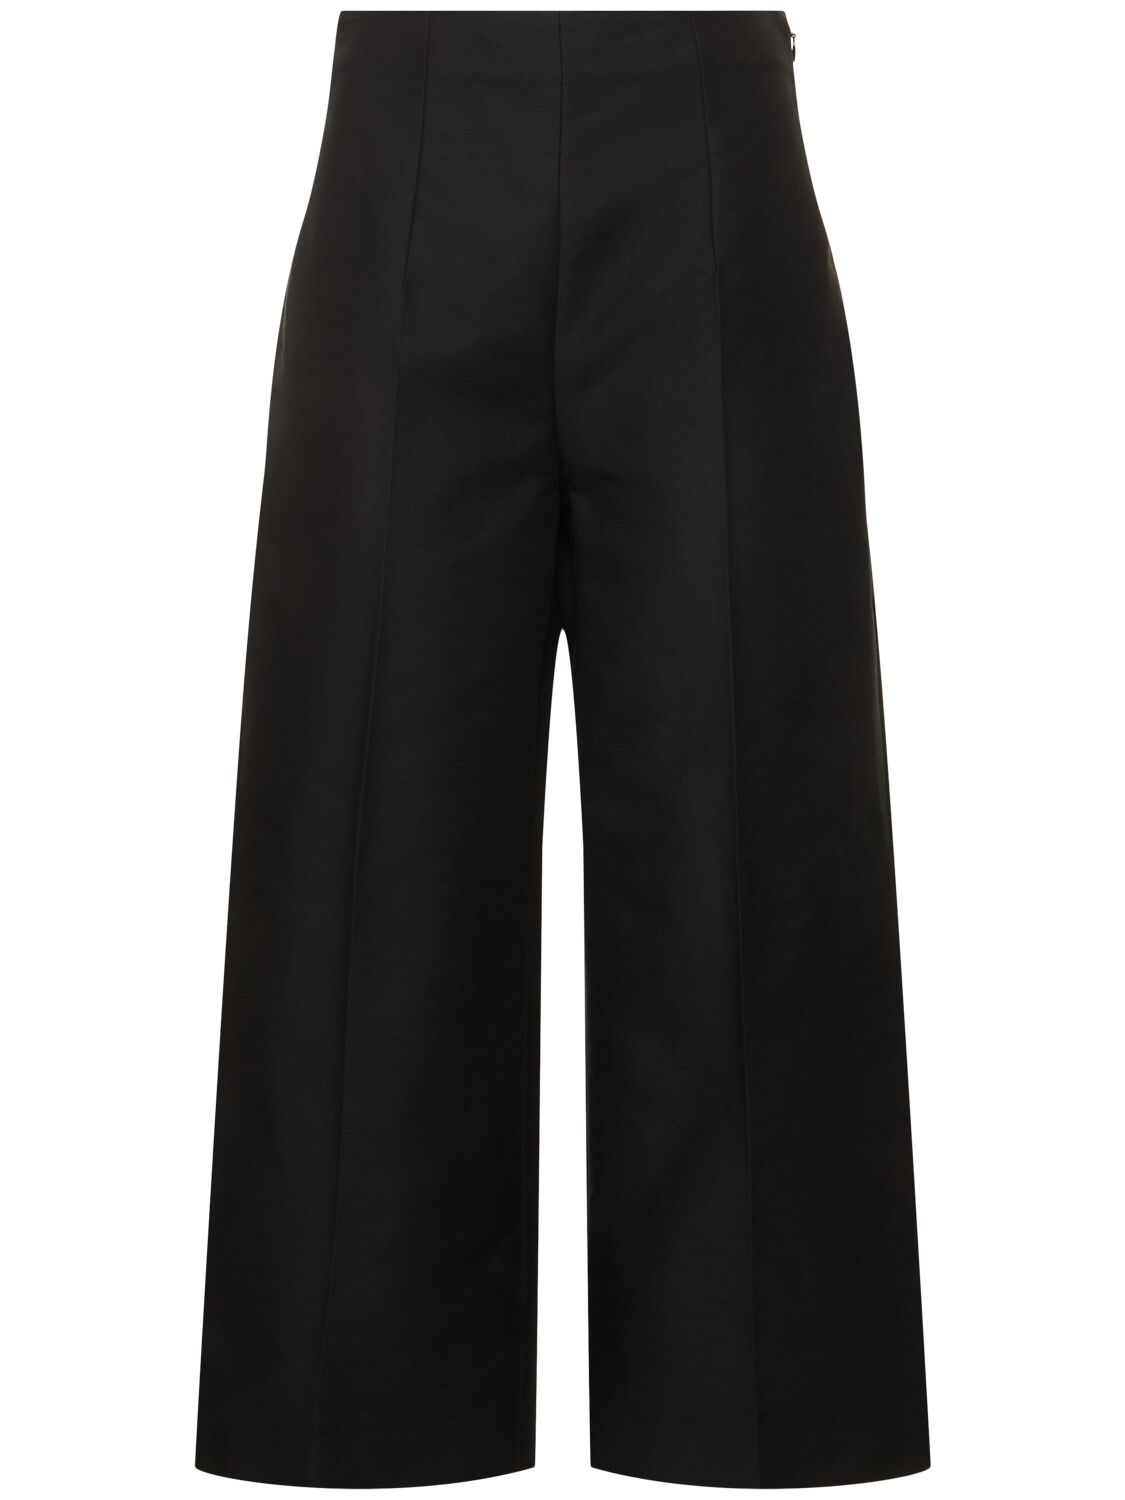 Image of Cotto Cady High Waist Wide Cropped Pants